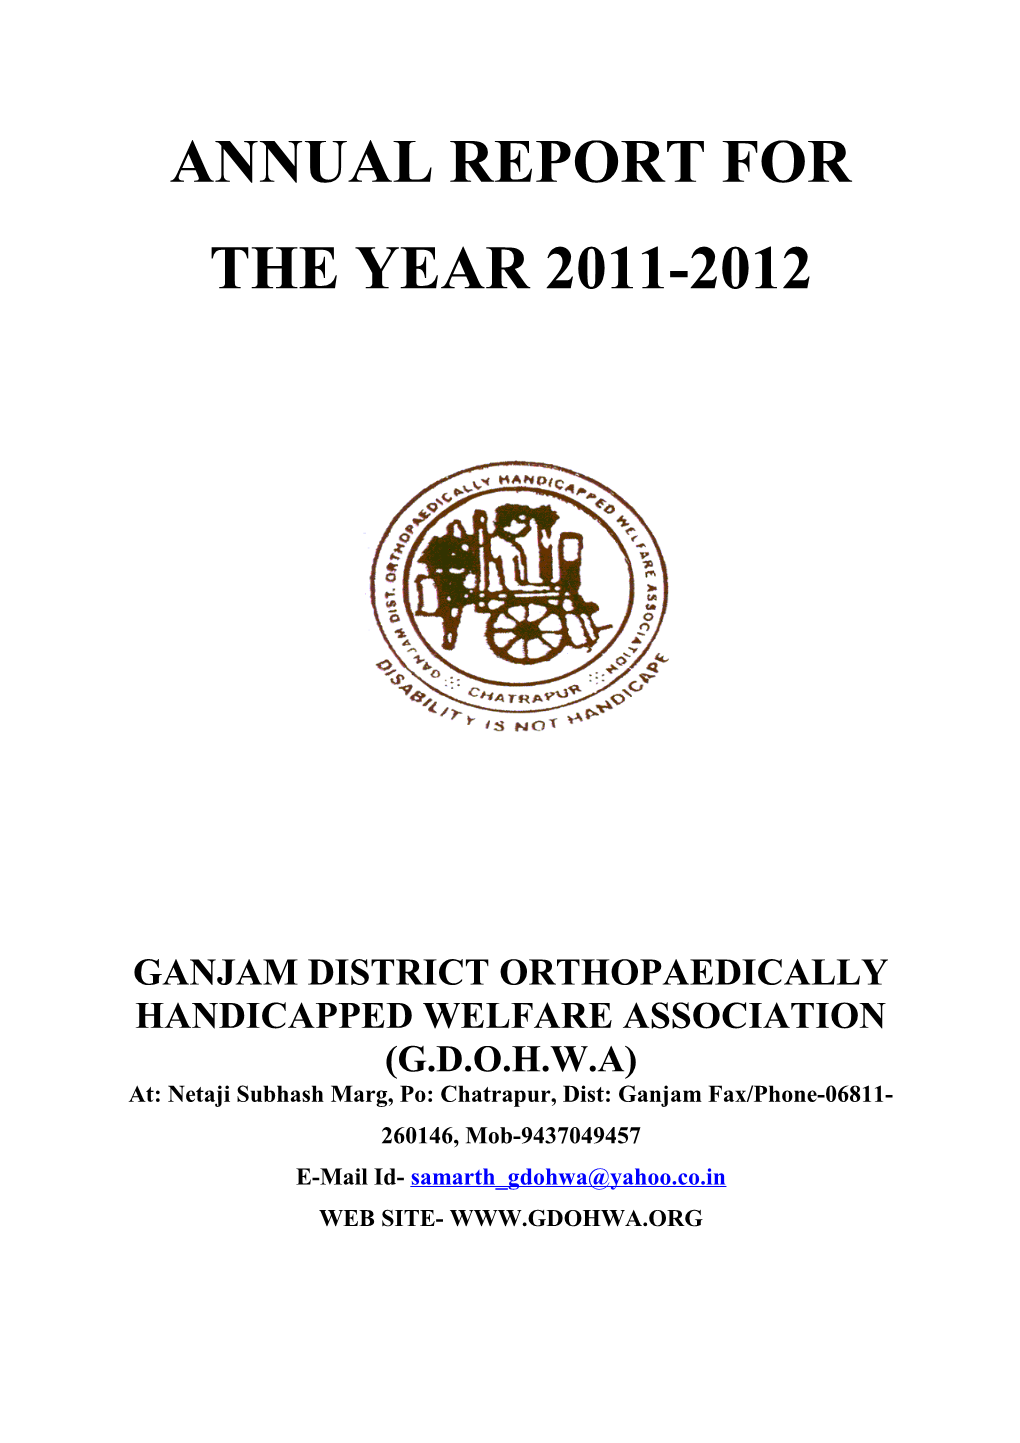 Annual Report for the Year 2011-2012